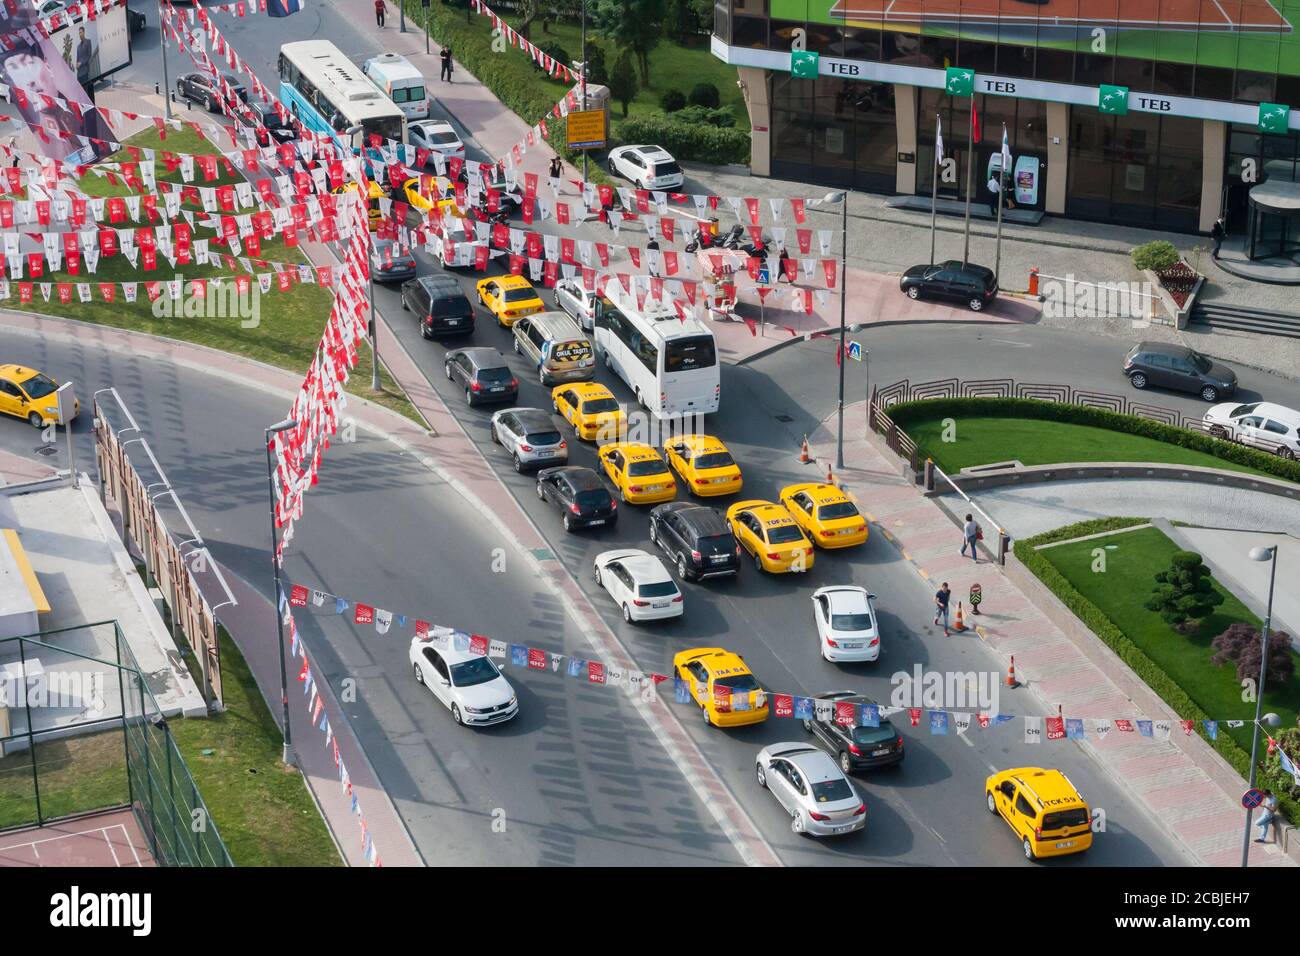 Istanbul, Turkey May 22 2015: aerial view of a street in Istanbul with many CHP political party flags and yellow taxi cabs. Stock Photo